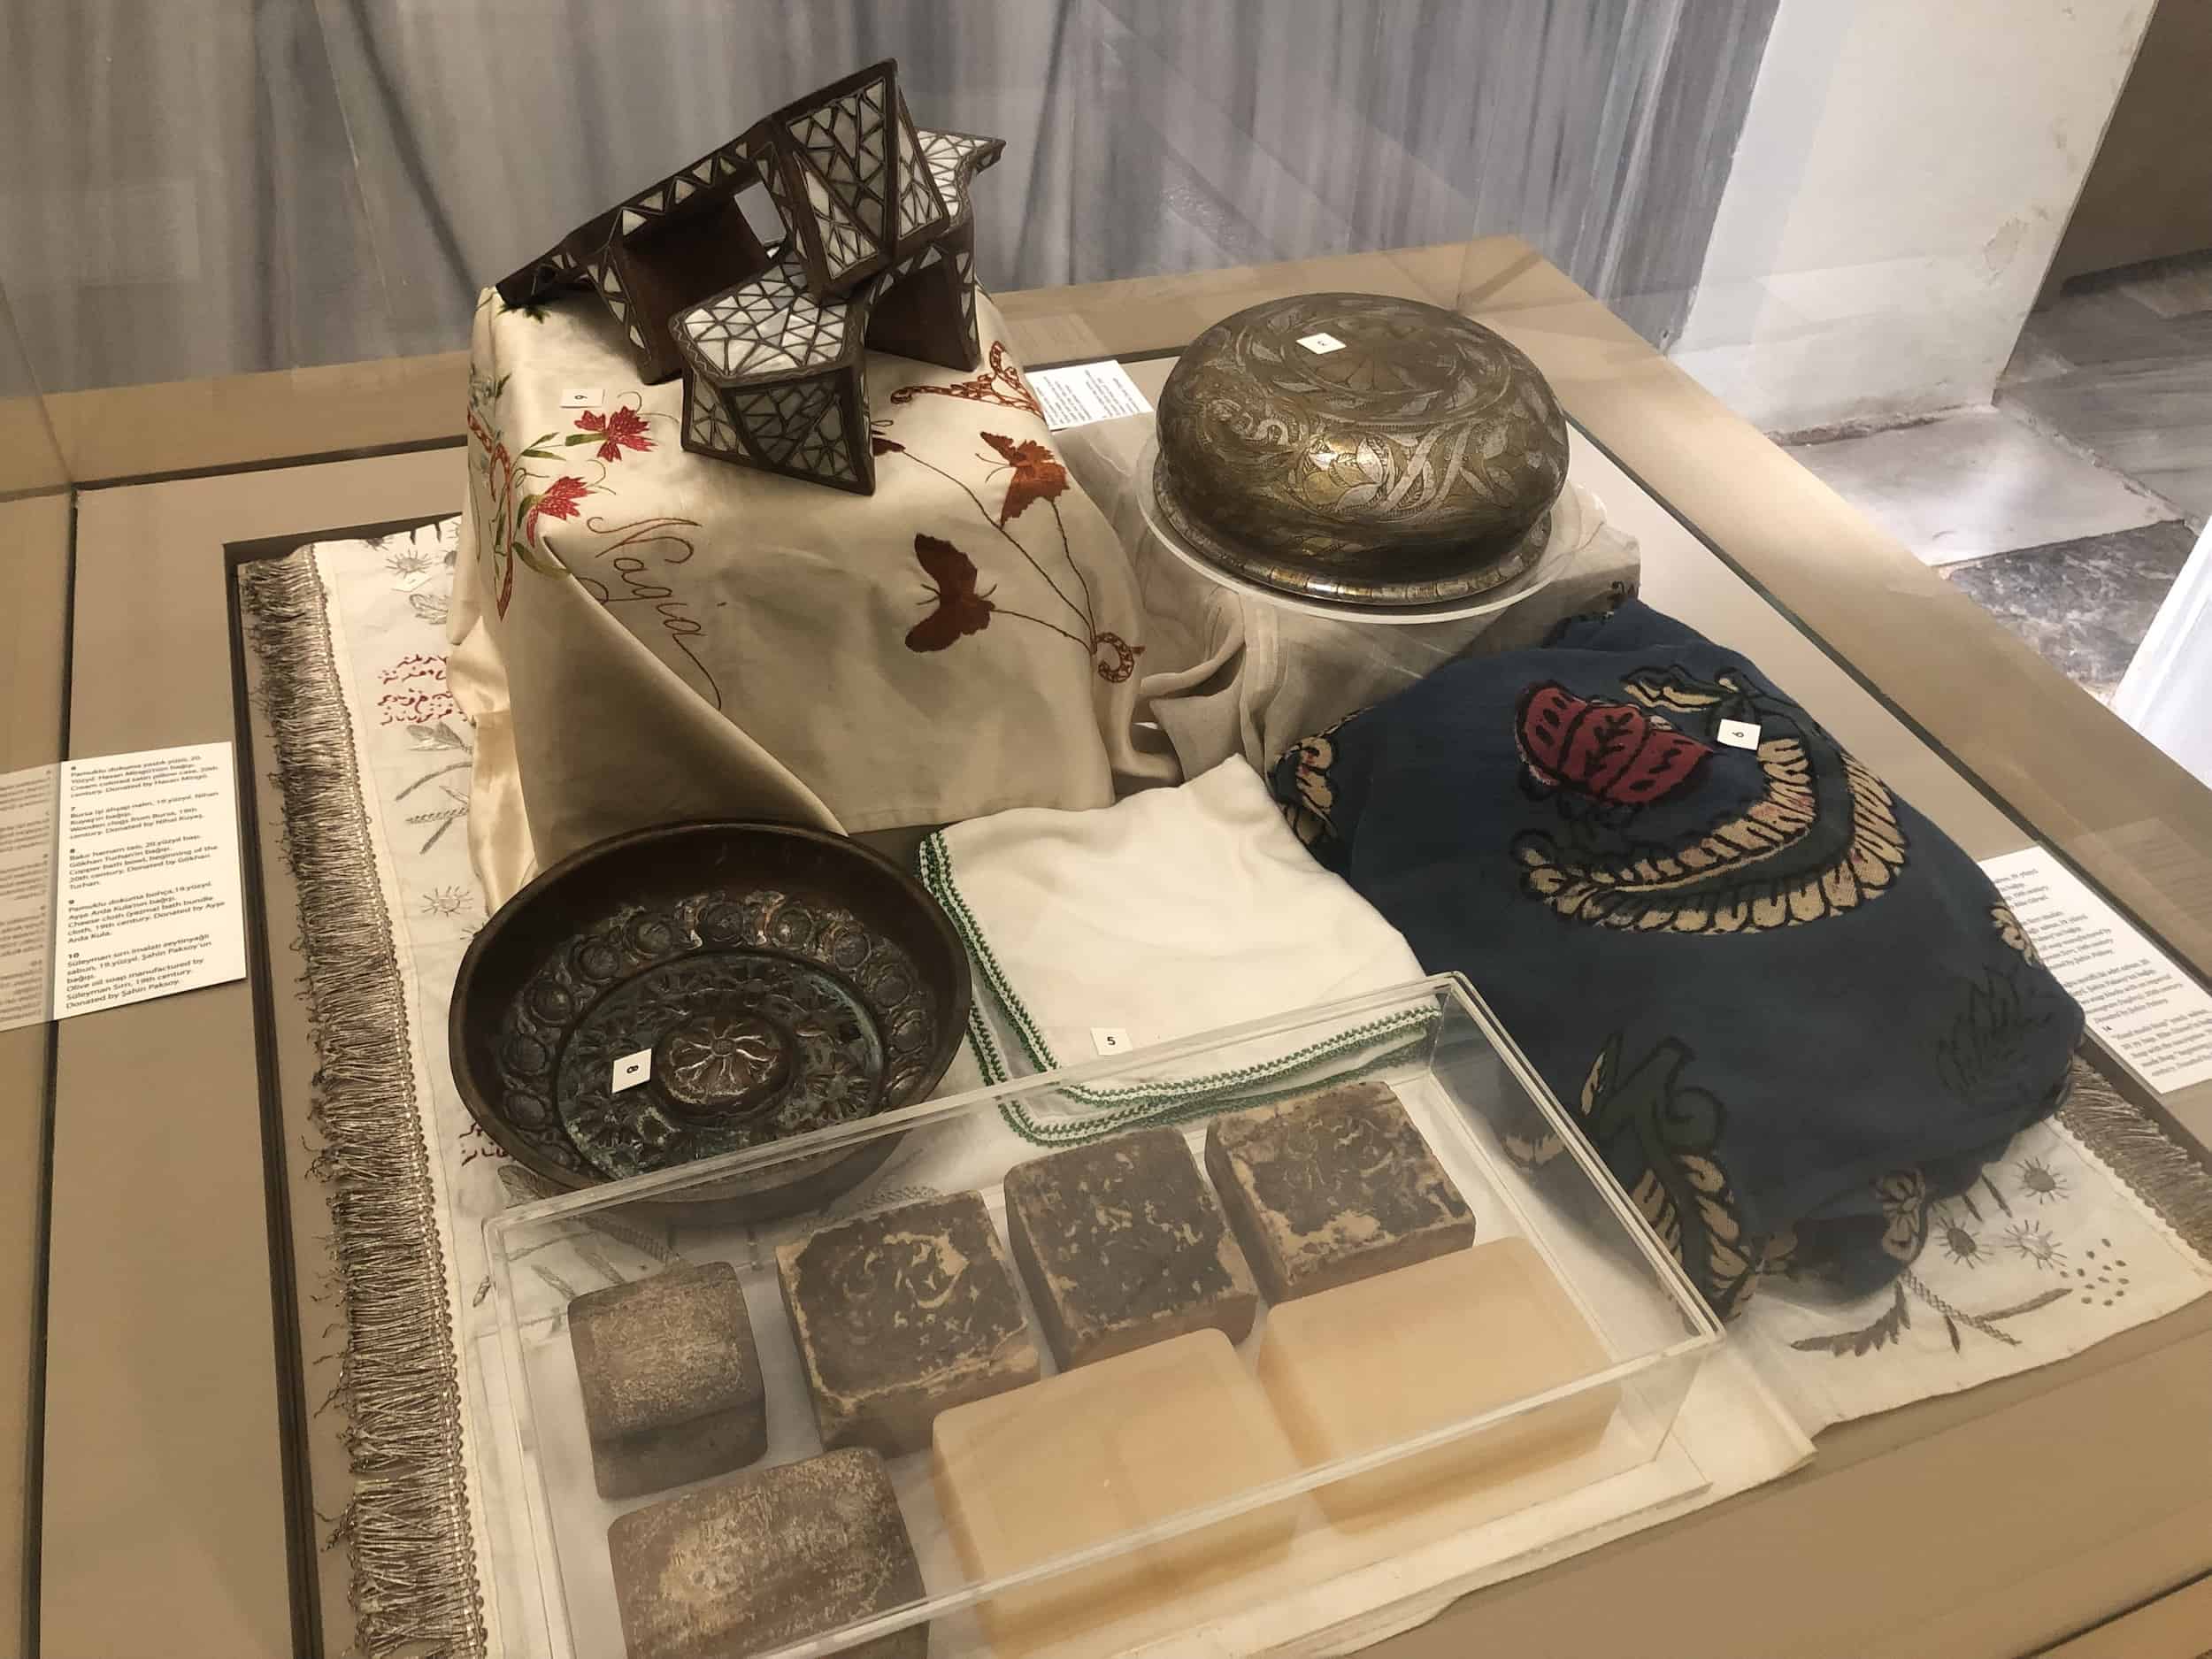 Olive oil soap and other items in the women's hot room at the Bayezid II Hamam (Bayezid II Turkish Bath Cultural Museum) in Beyazıt, Istanbul, Turkey